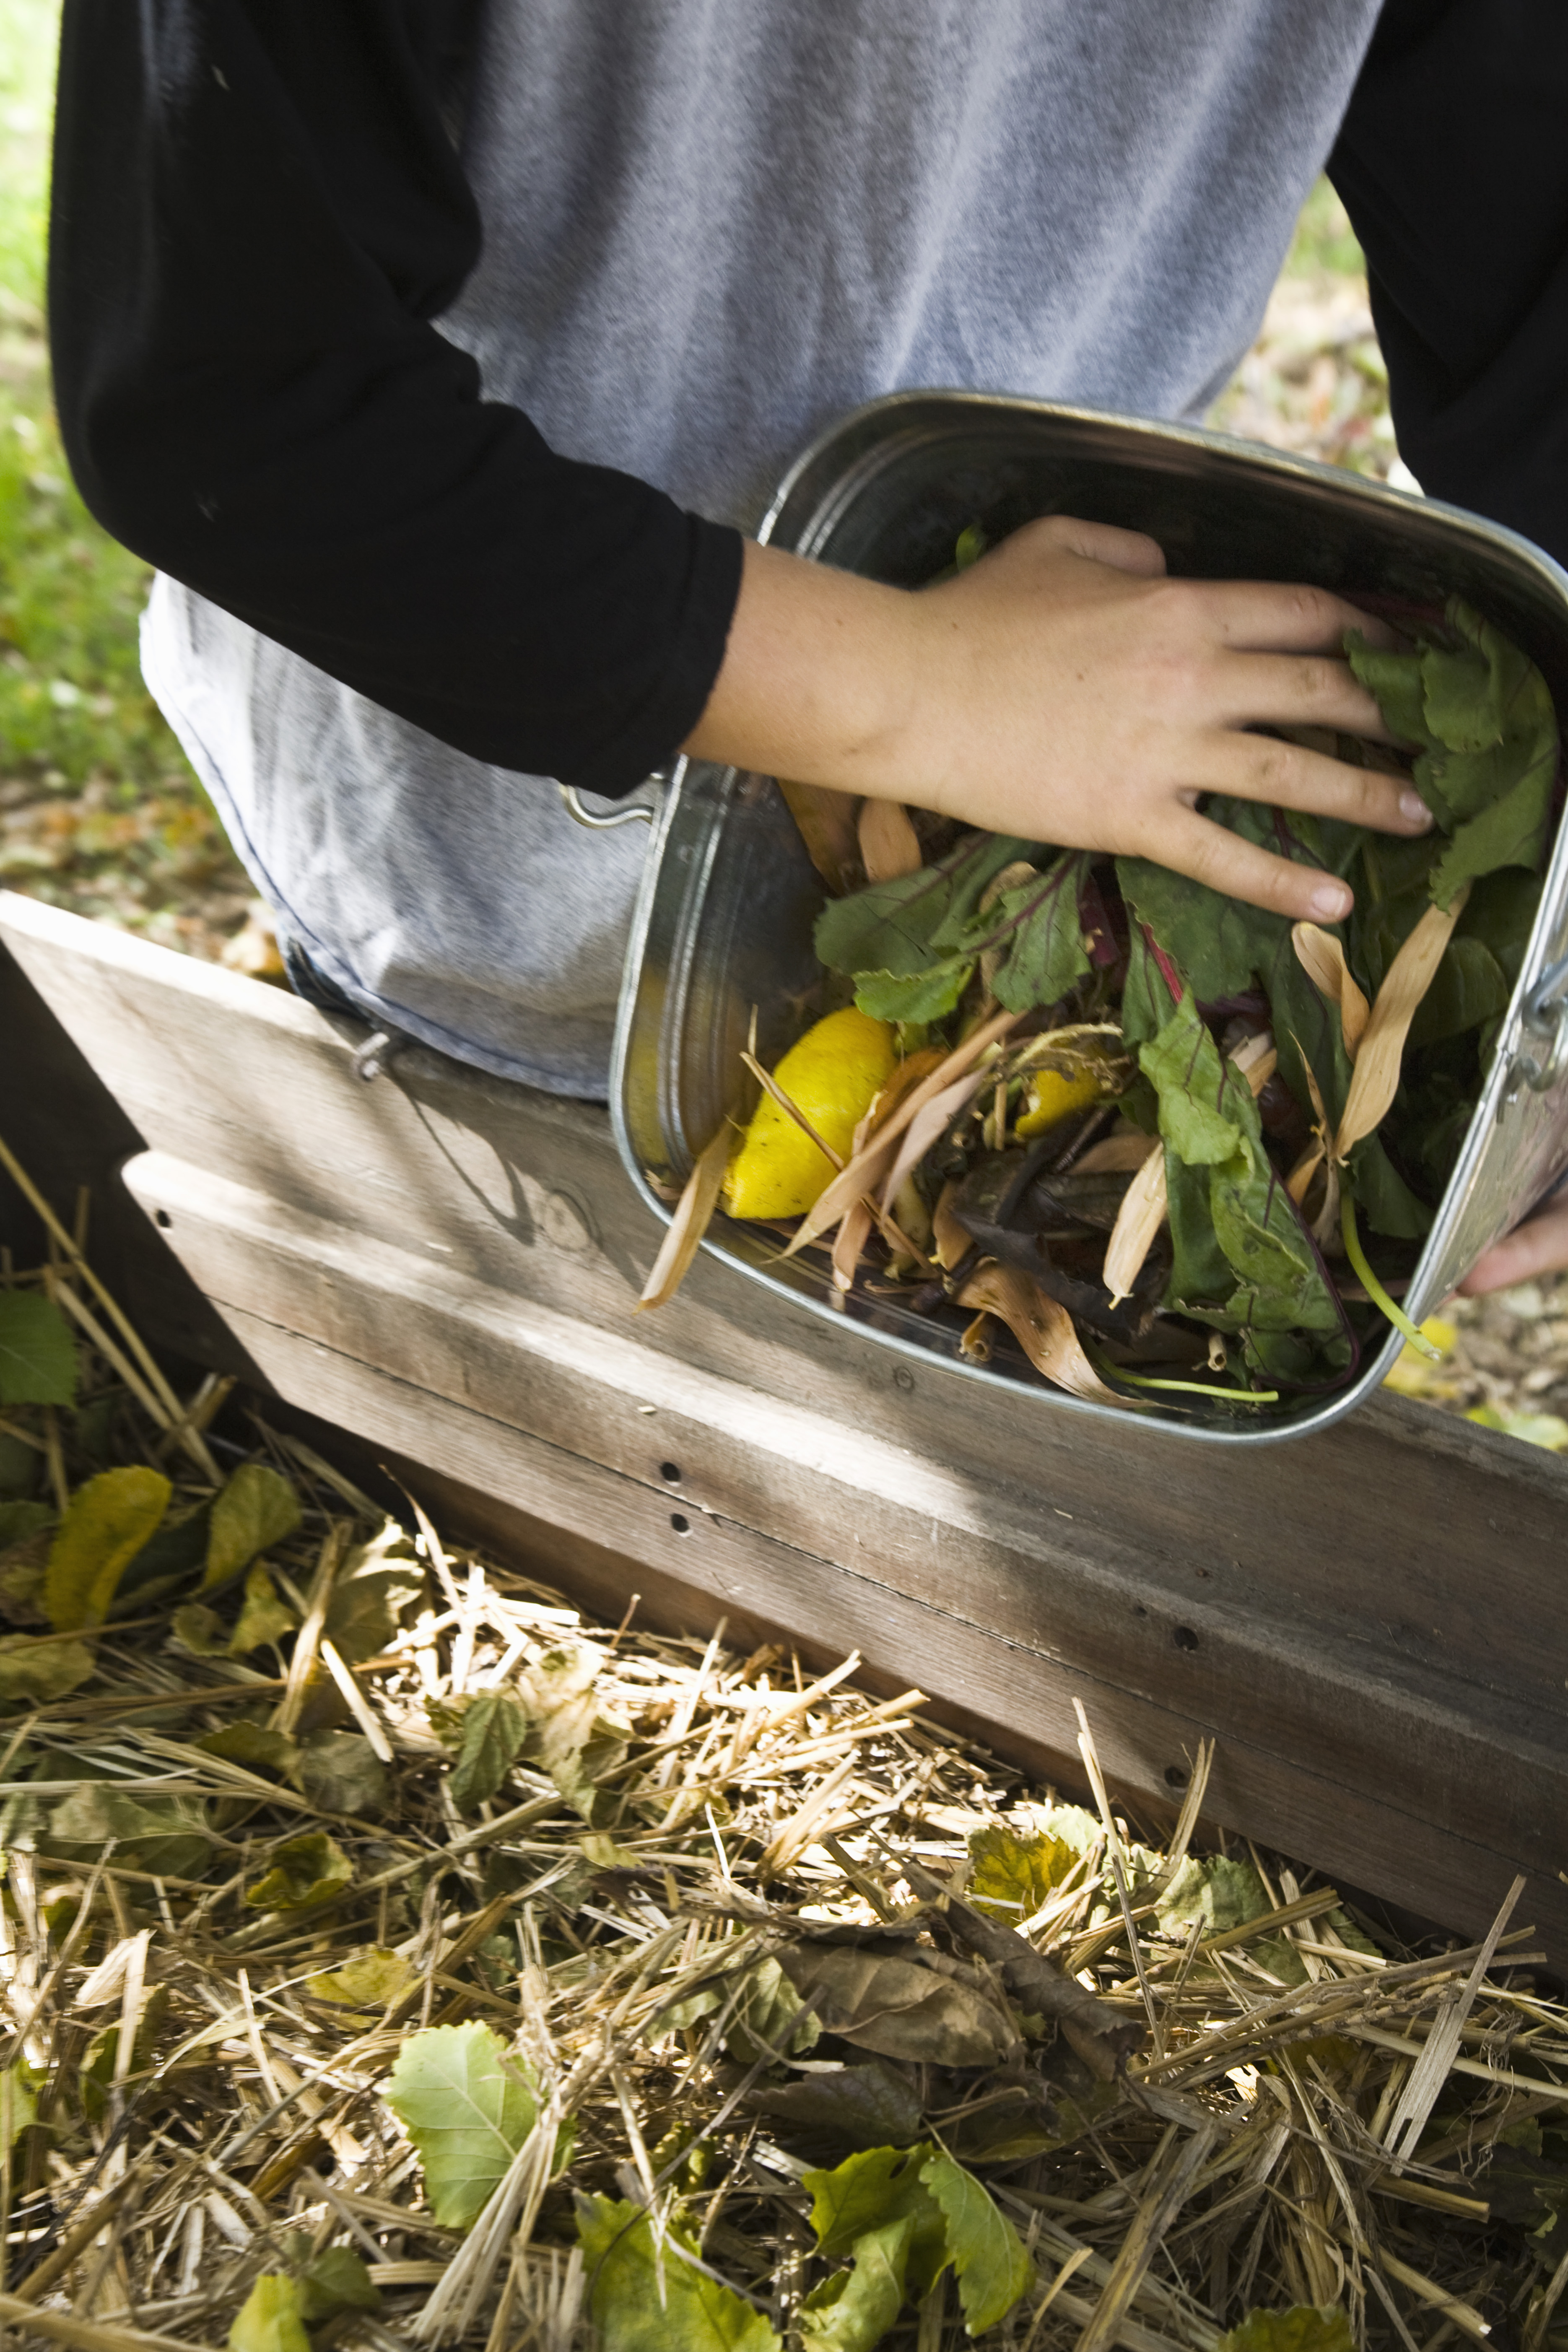 Child moves food scraps into compost bin filled with leaves and straw